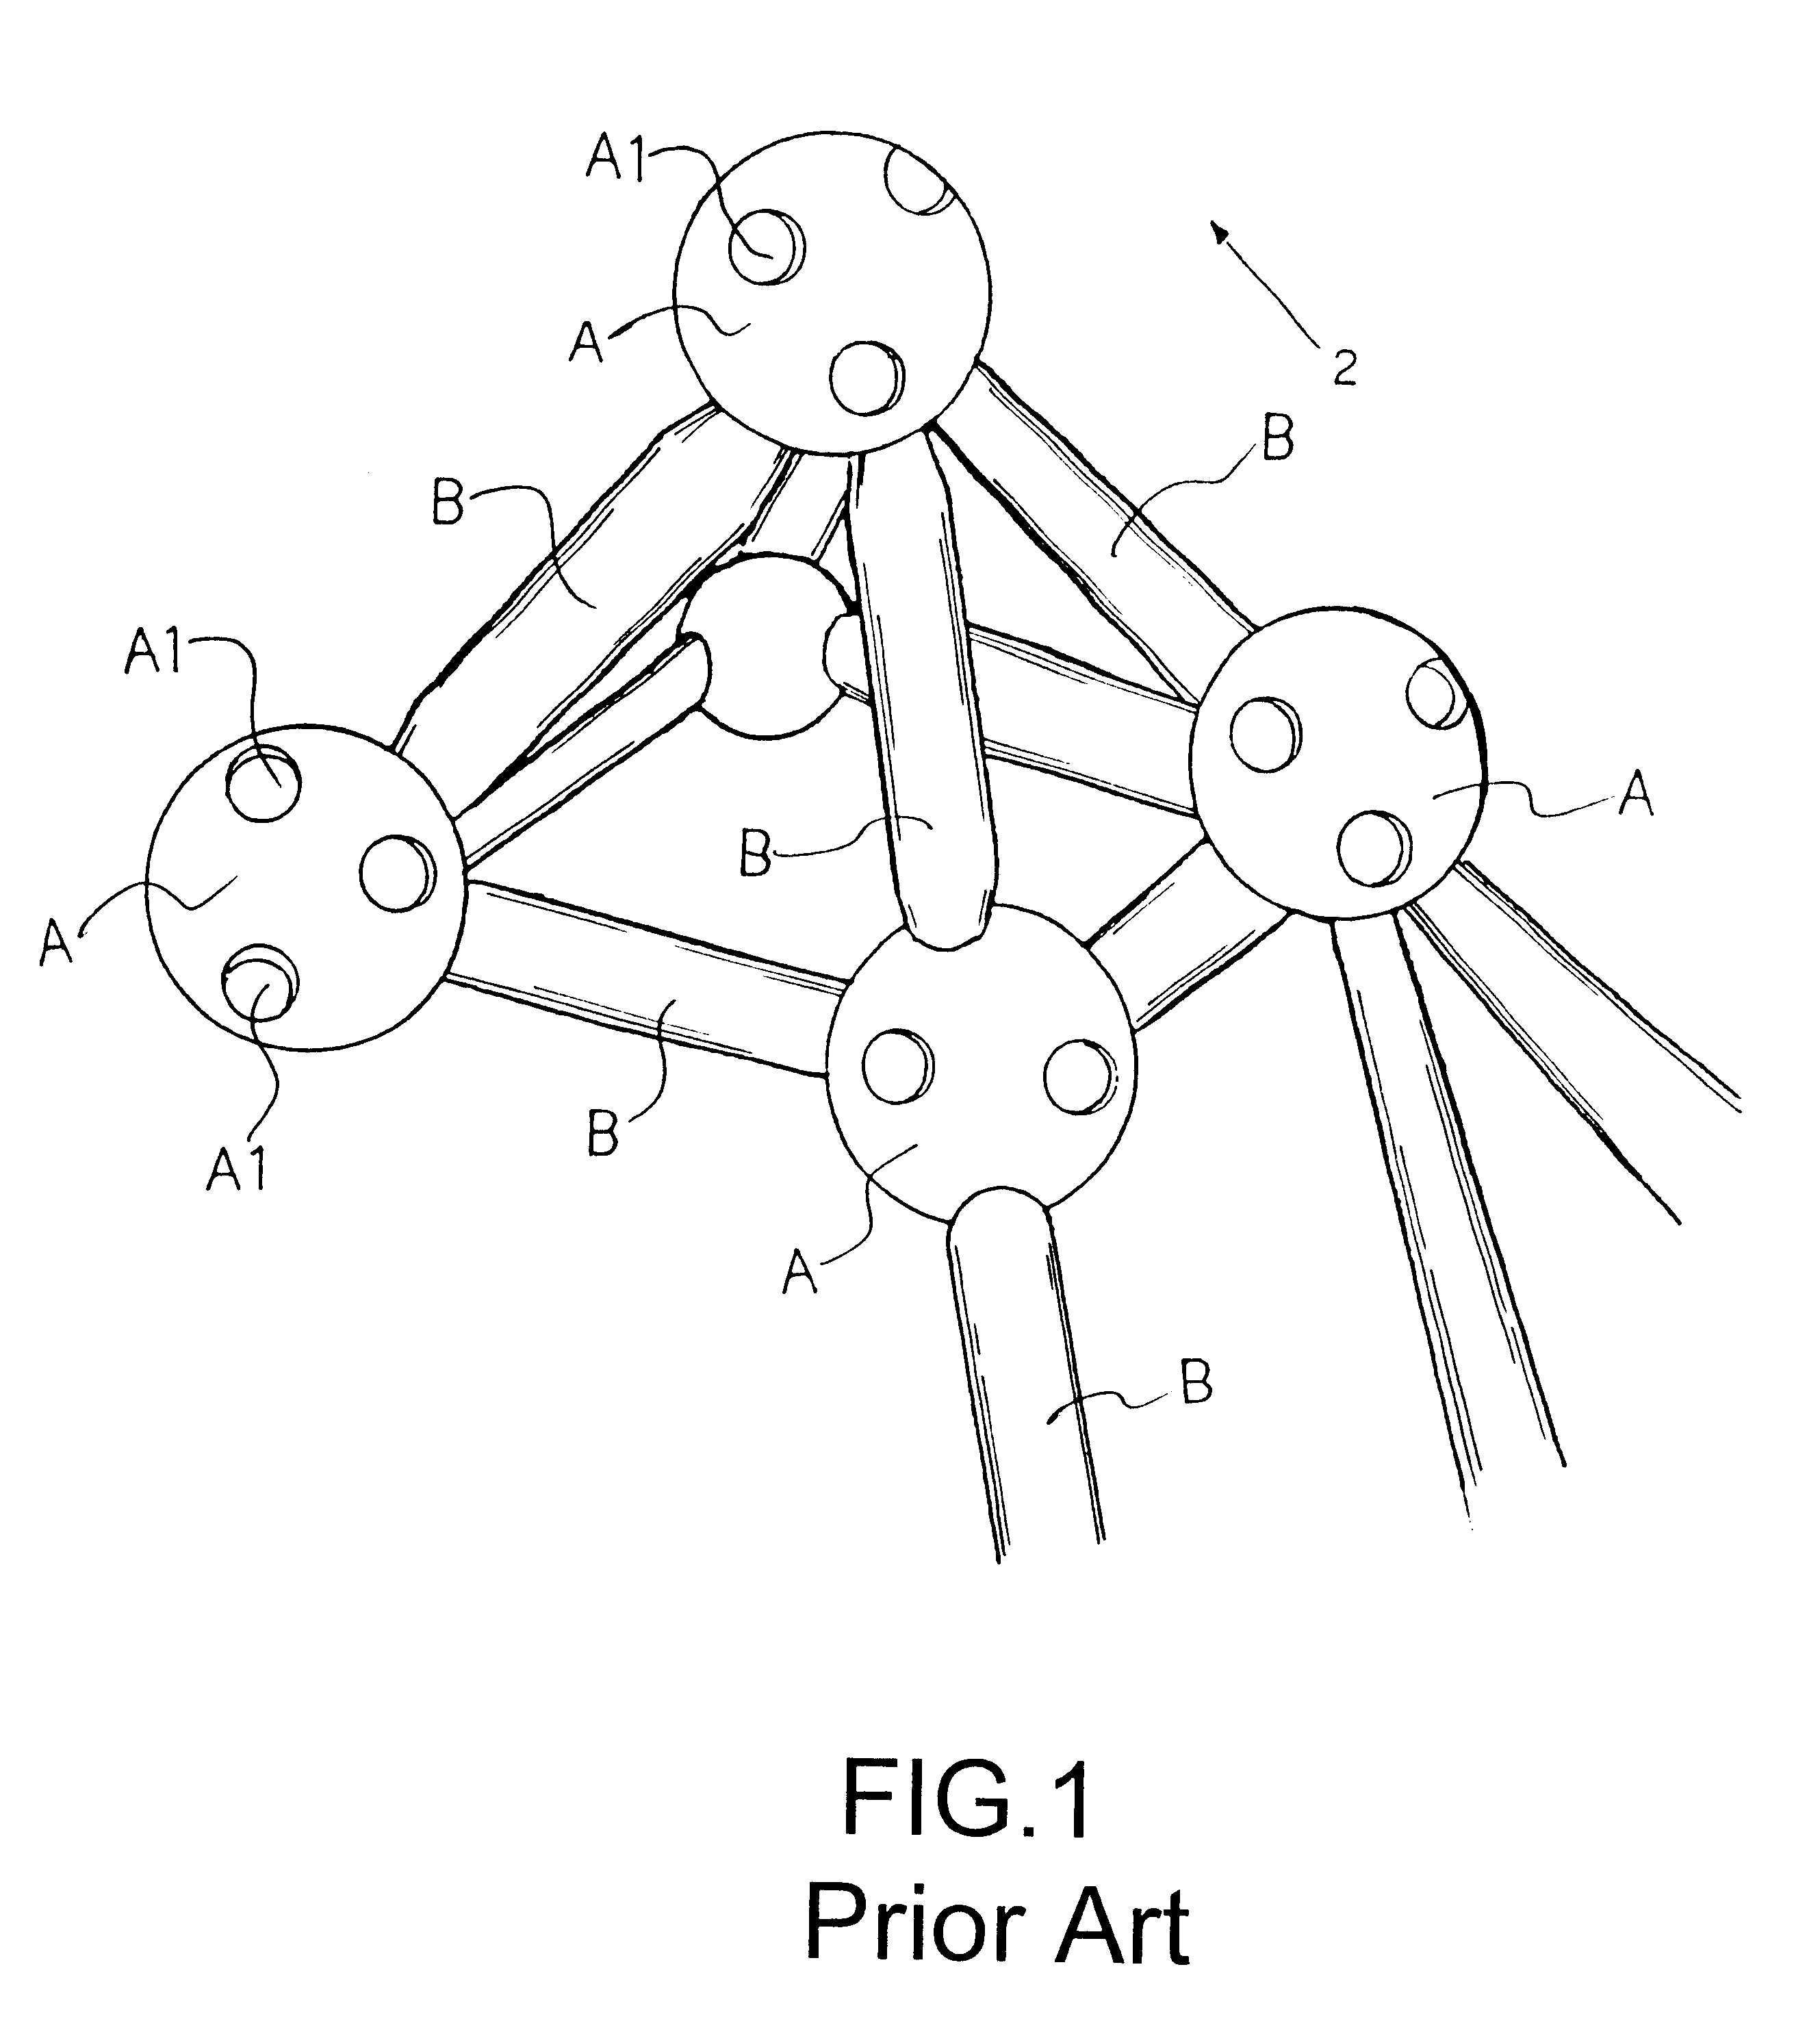 Spherical connector and supporting rod assembly